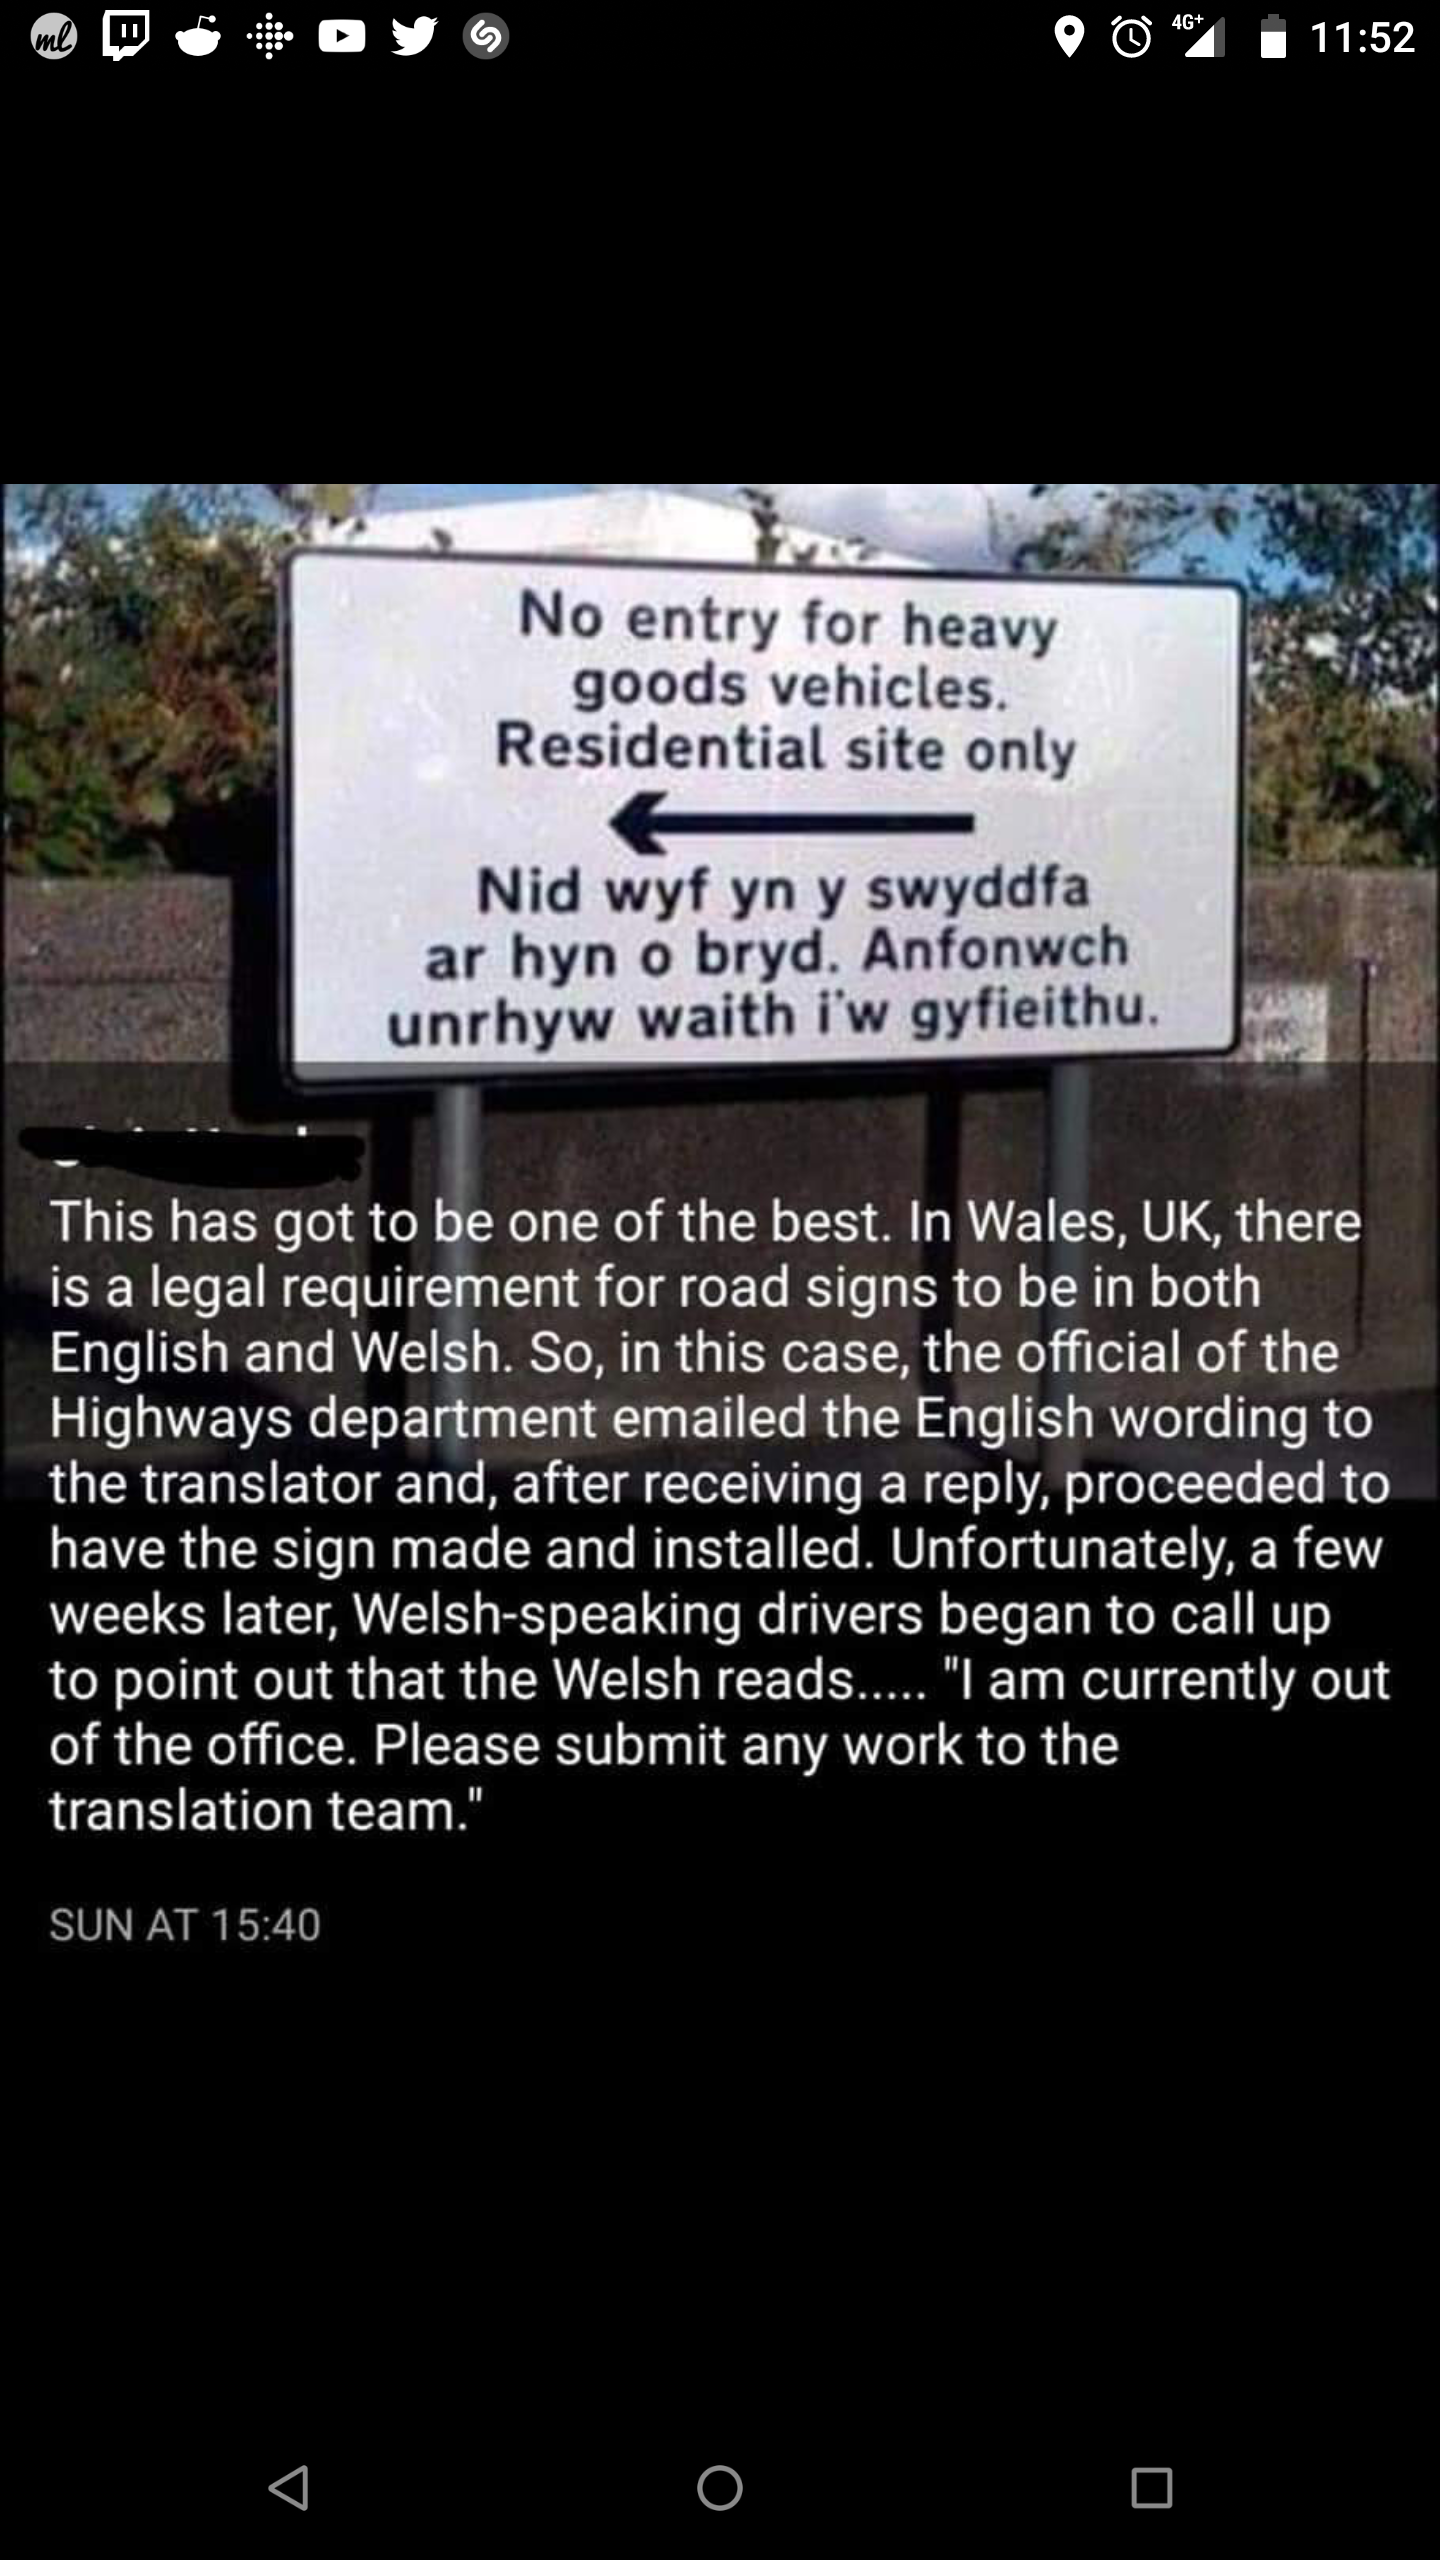 Got to love the Welsh